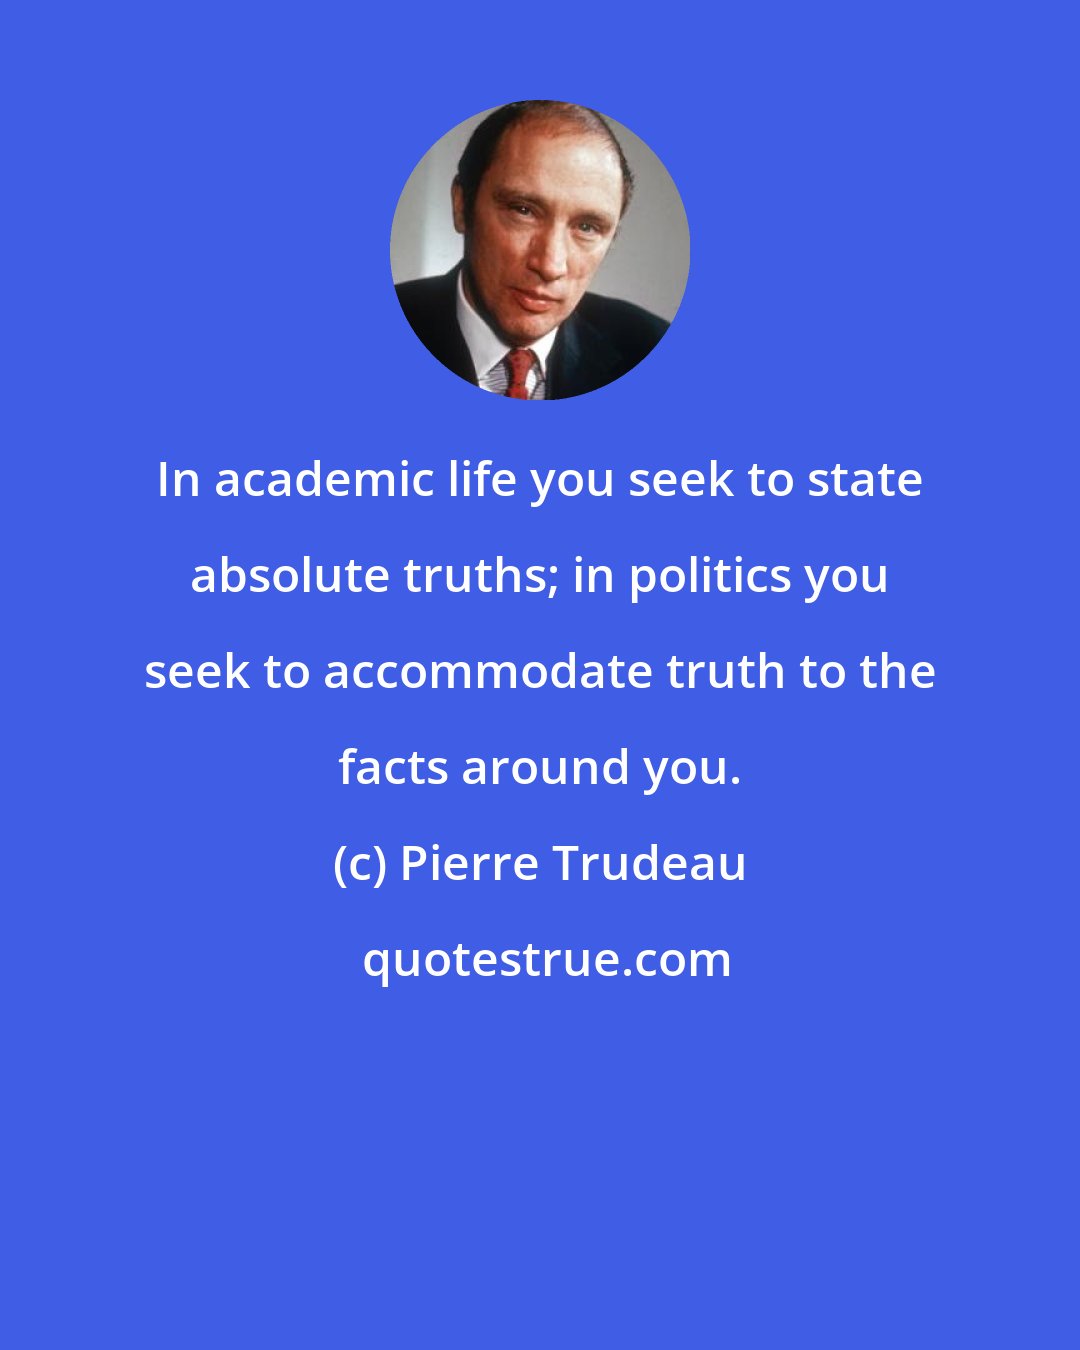 Pierre Trudeau: In academic life you seek to state absolute truths; in politics you seek to accommodate truth to the facts around you.